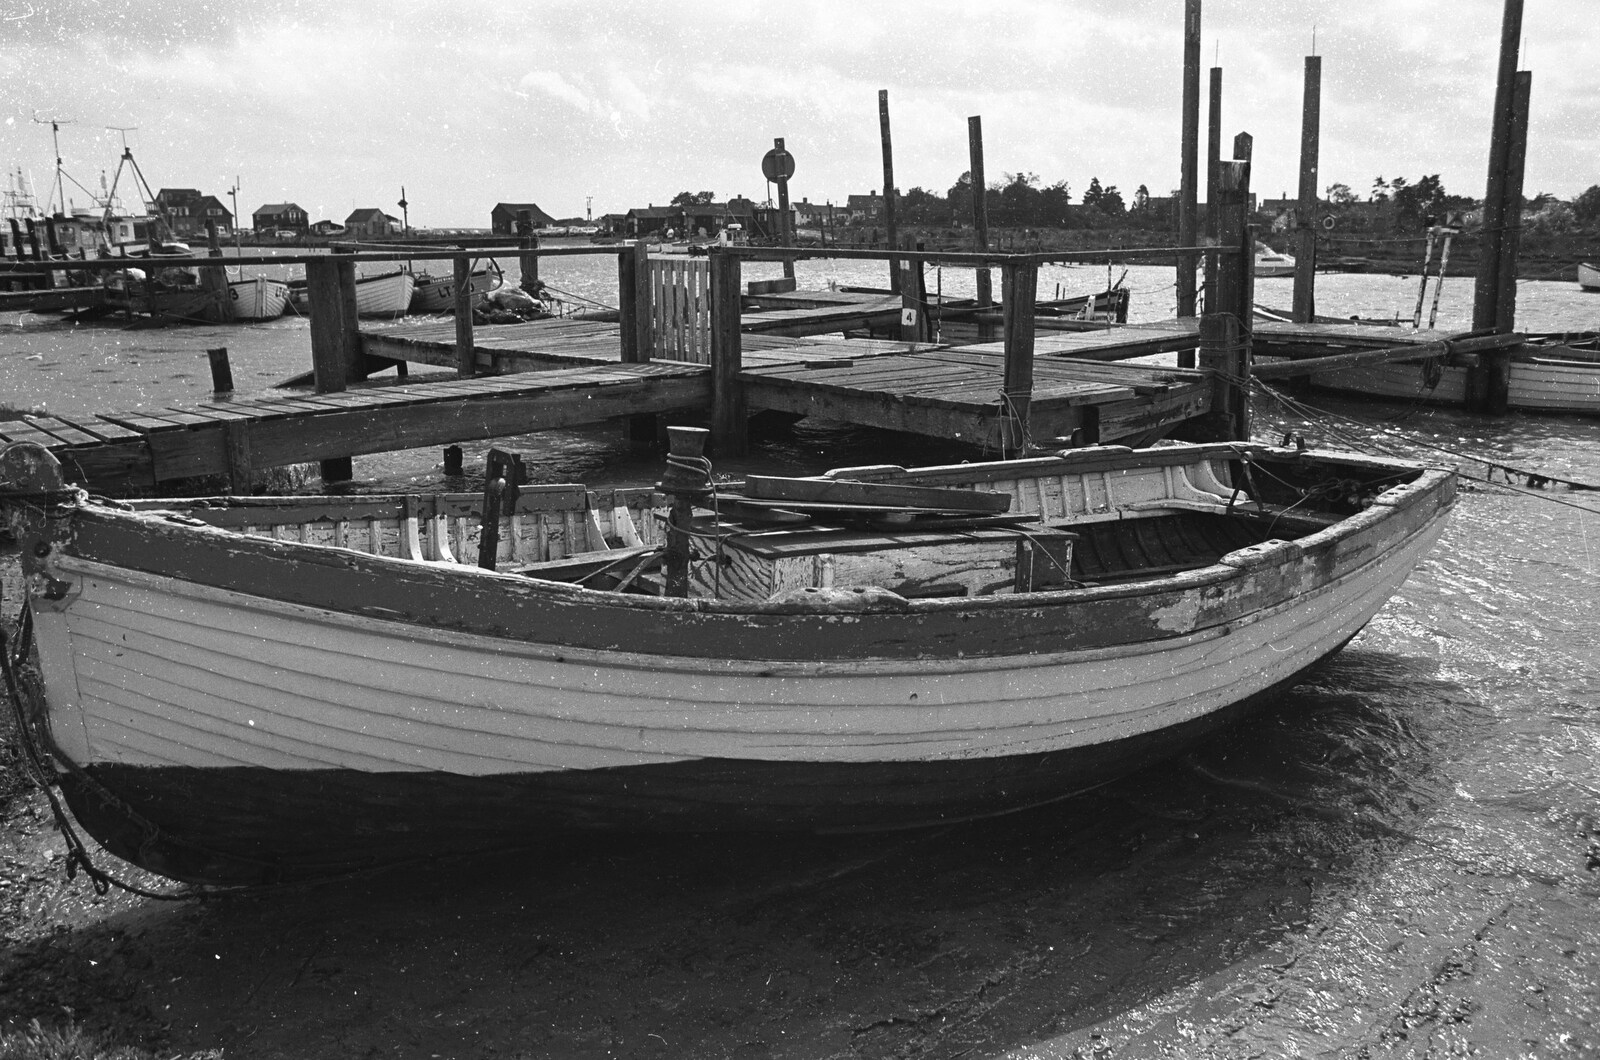 Blackshore Quay in Black and White, Southwold and Sizewell, Suffolk - 16th September 1992: An open fishing boat